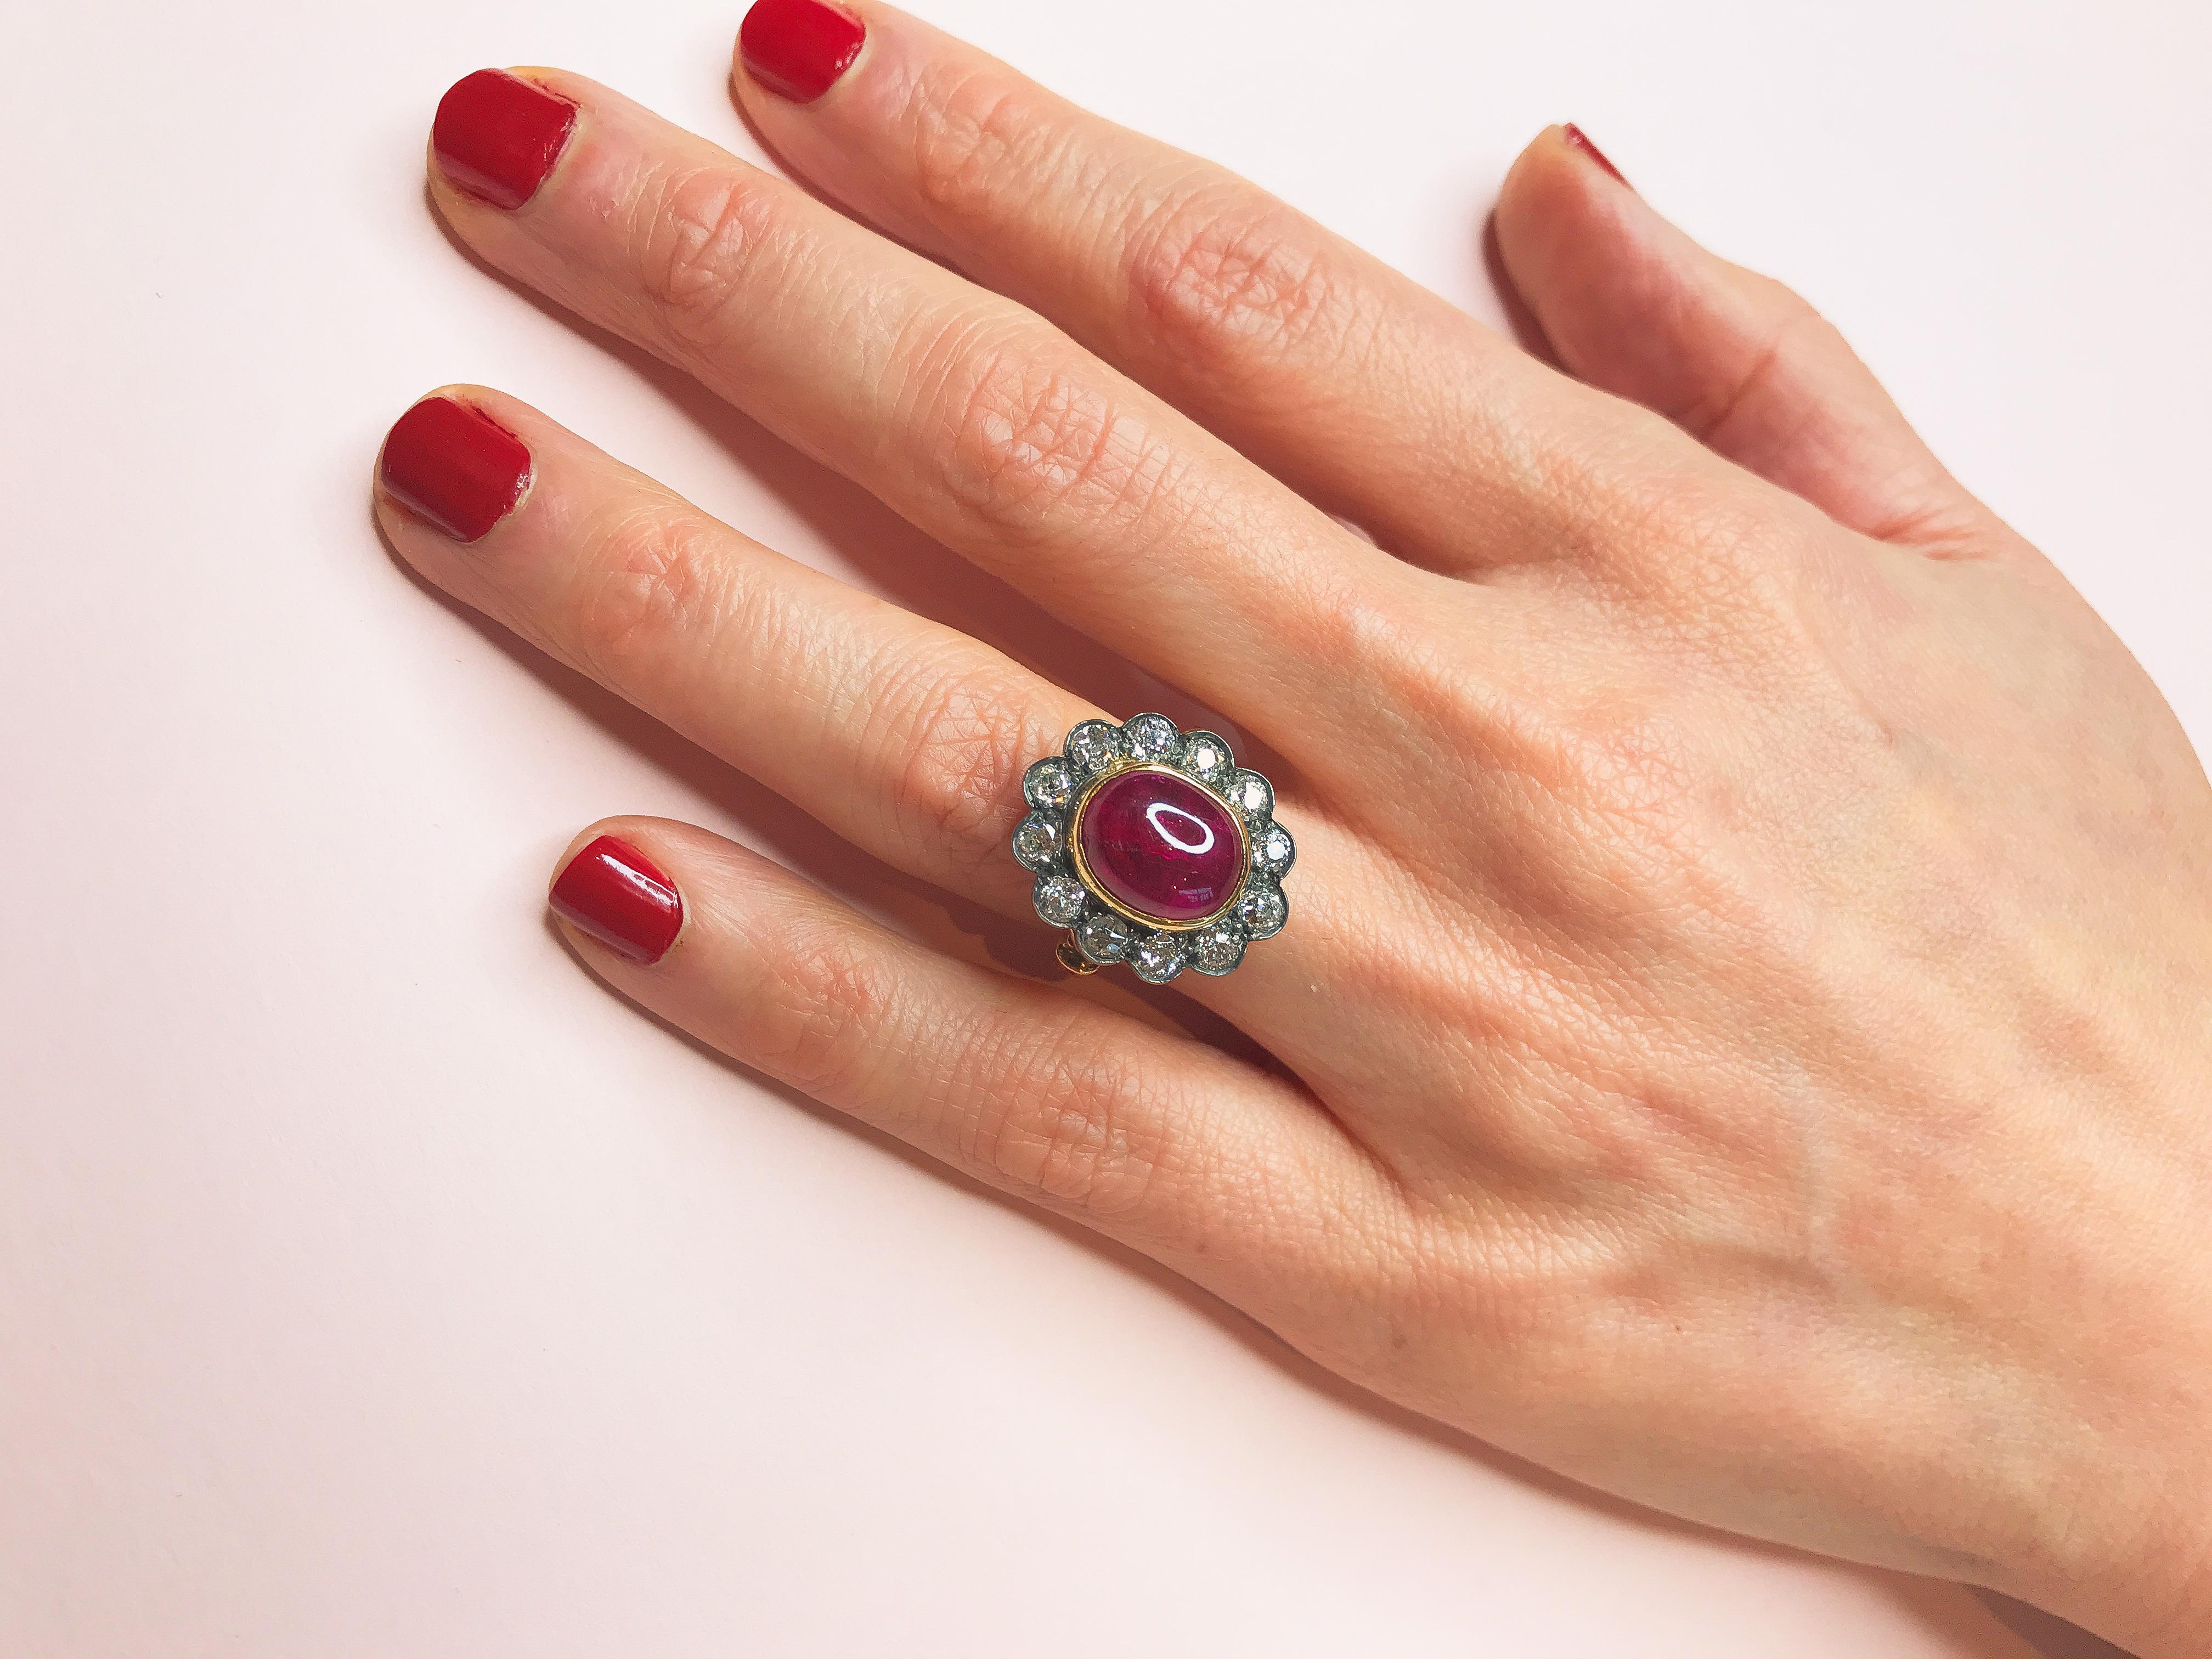 The hand-picked cabochon ruby at the centre of this vintage-style ring is enough to take your breath away, thanks to its large size and charming pinkish red colour. Accentuating its rich tones is the halo around it, consisting of round brilliant